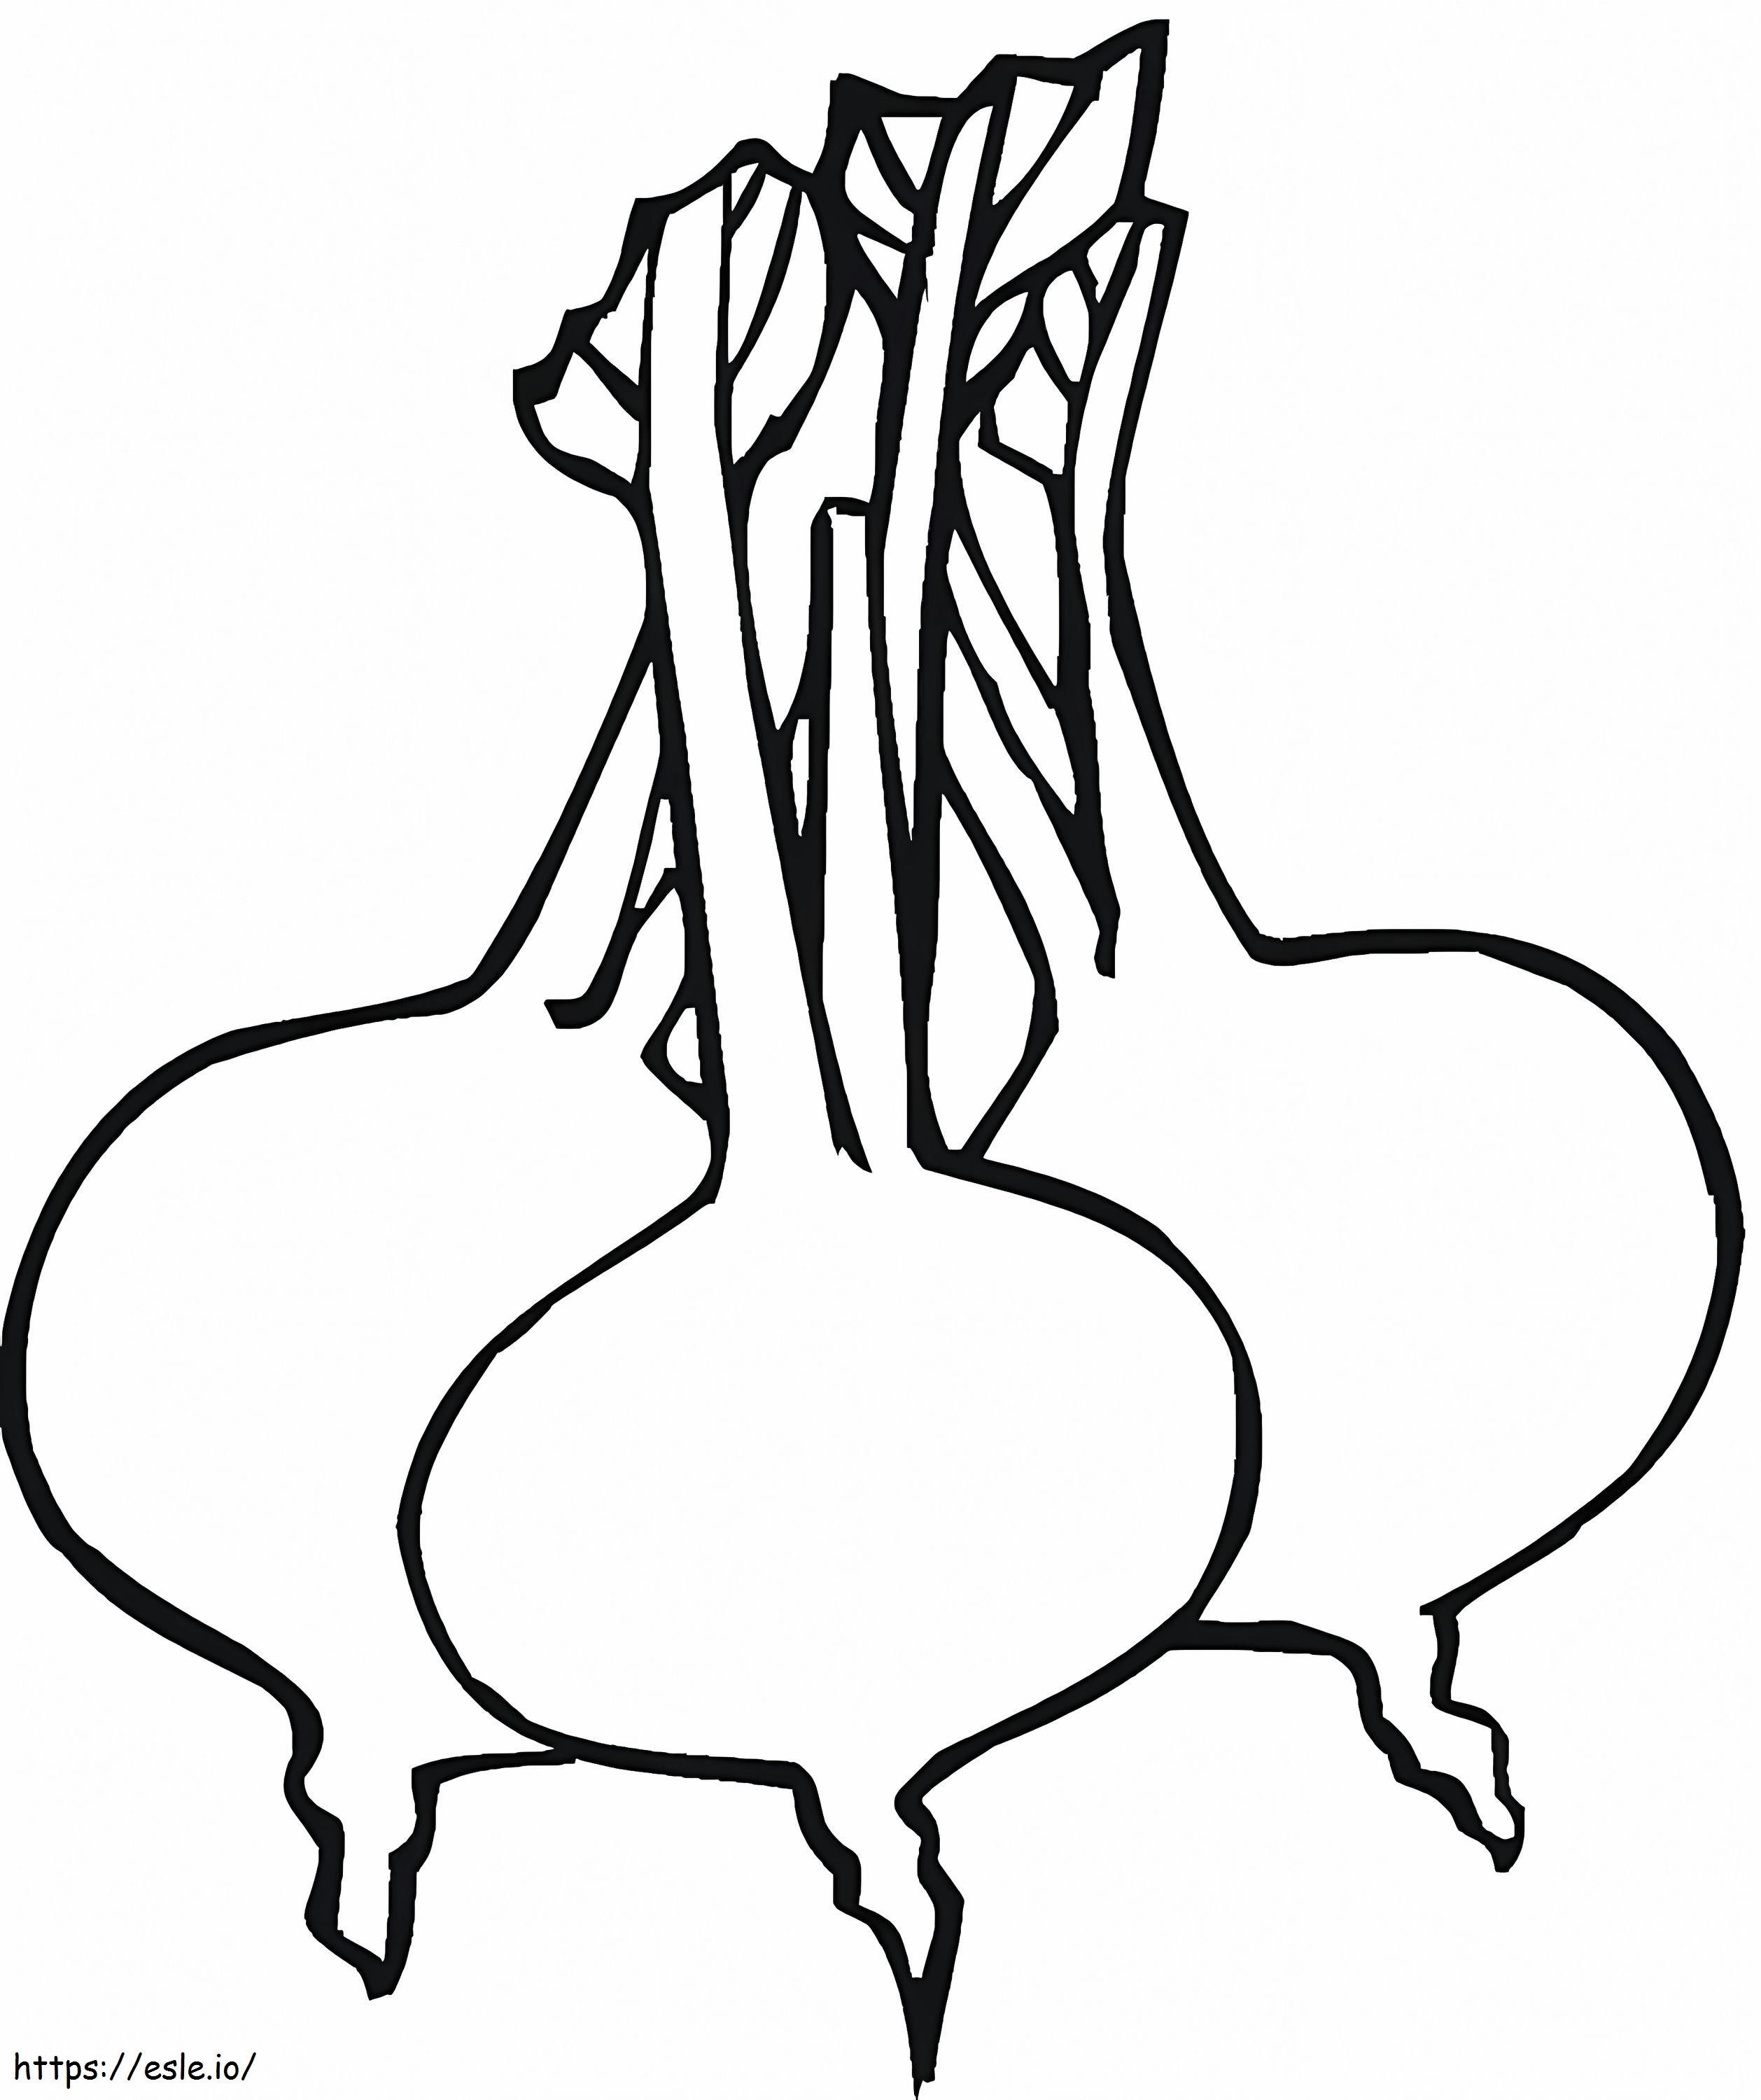 Beetroots coloring page